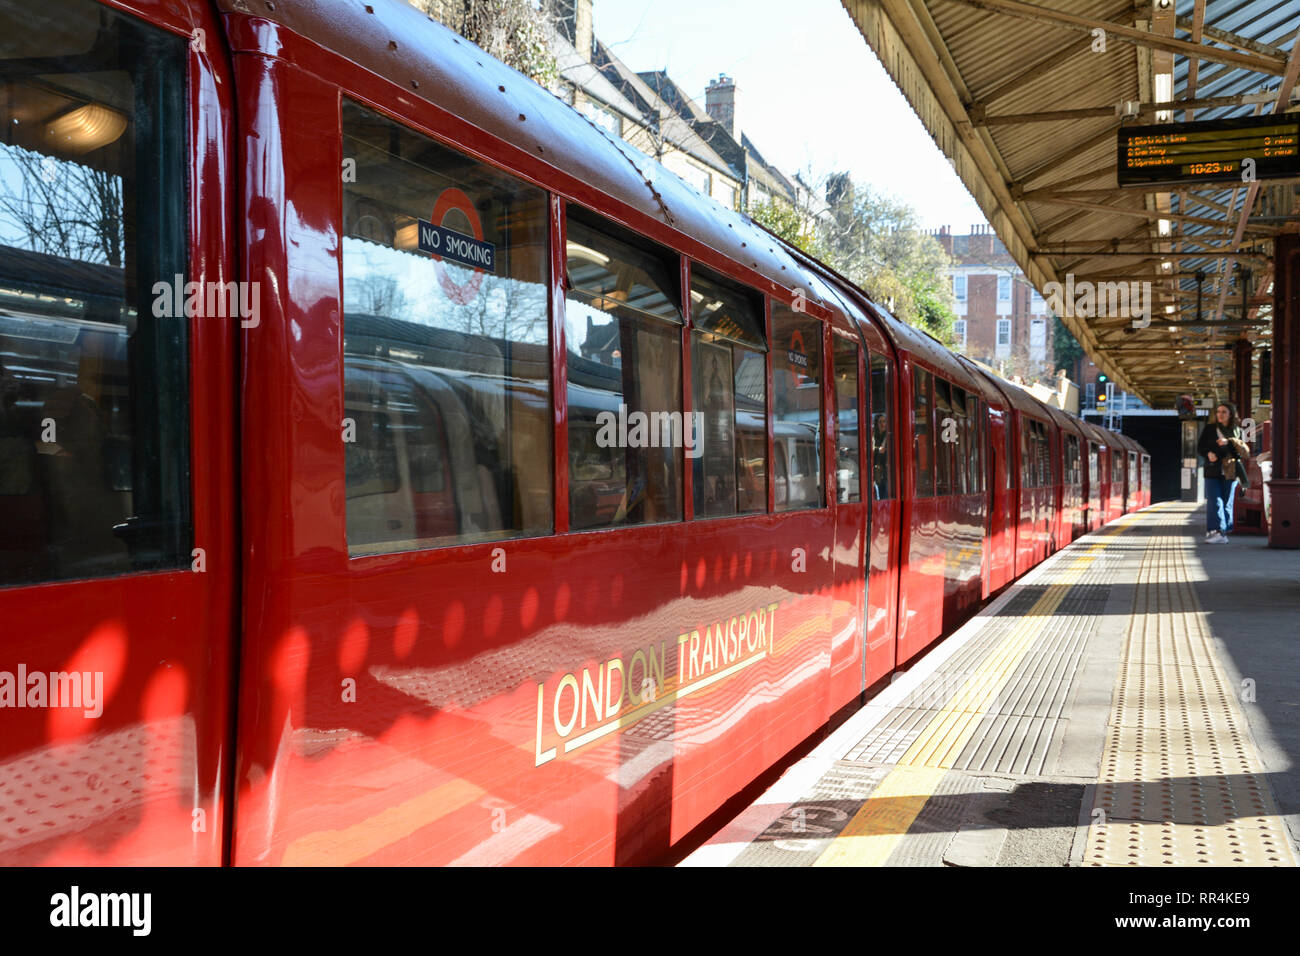 London, England, UK. 24 February 2019.  A beautifully restored art-deco train at Barons Court tube station, on the District line,  in central London © Benjamin John/ Alamy Live News. Stock Photo